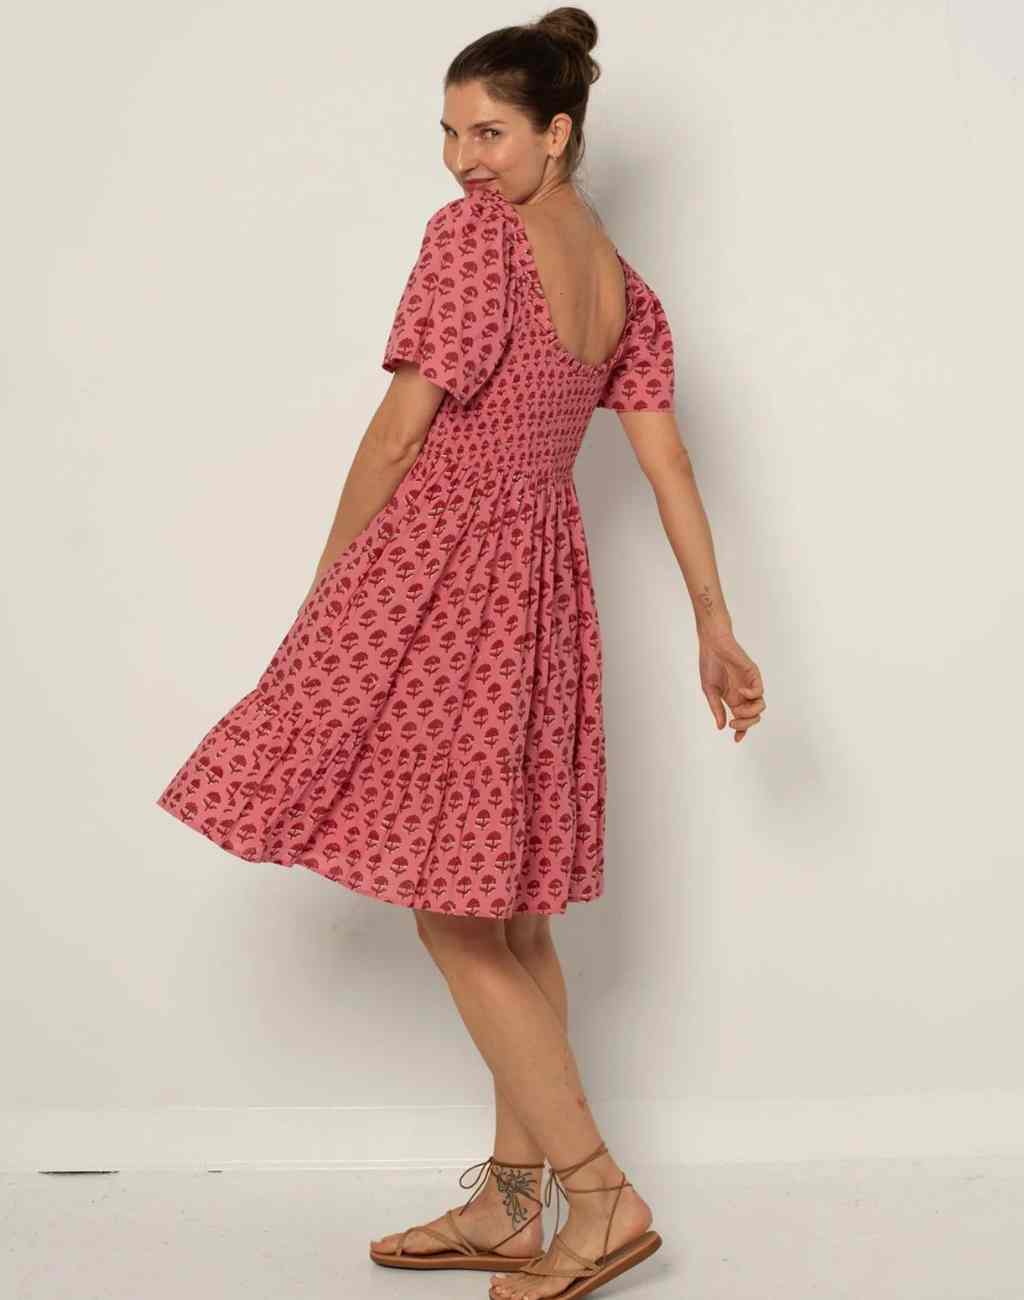 Delilah Short Dress in Red and Pink Hydrangea Print with Smocked Bodice